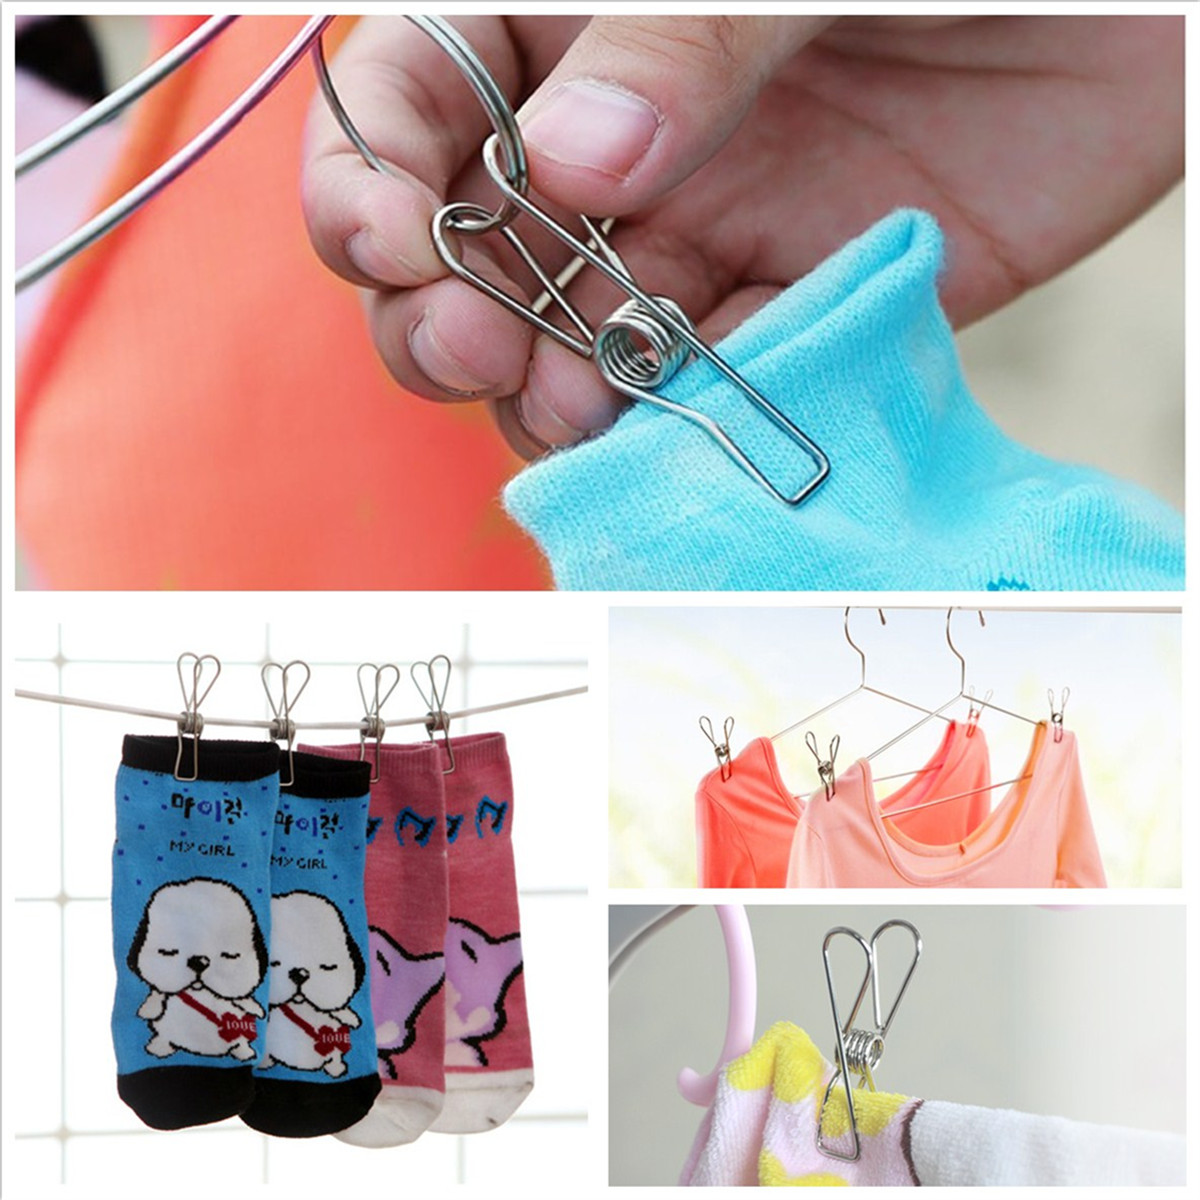 Sulevetrade-SSCH01-20Pcs-Stainless-Steel-Clothes-Pegs-Metal-Clips-Hanger-for-Socks-Underwear-Towel-S-1140045